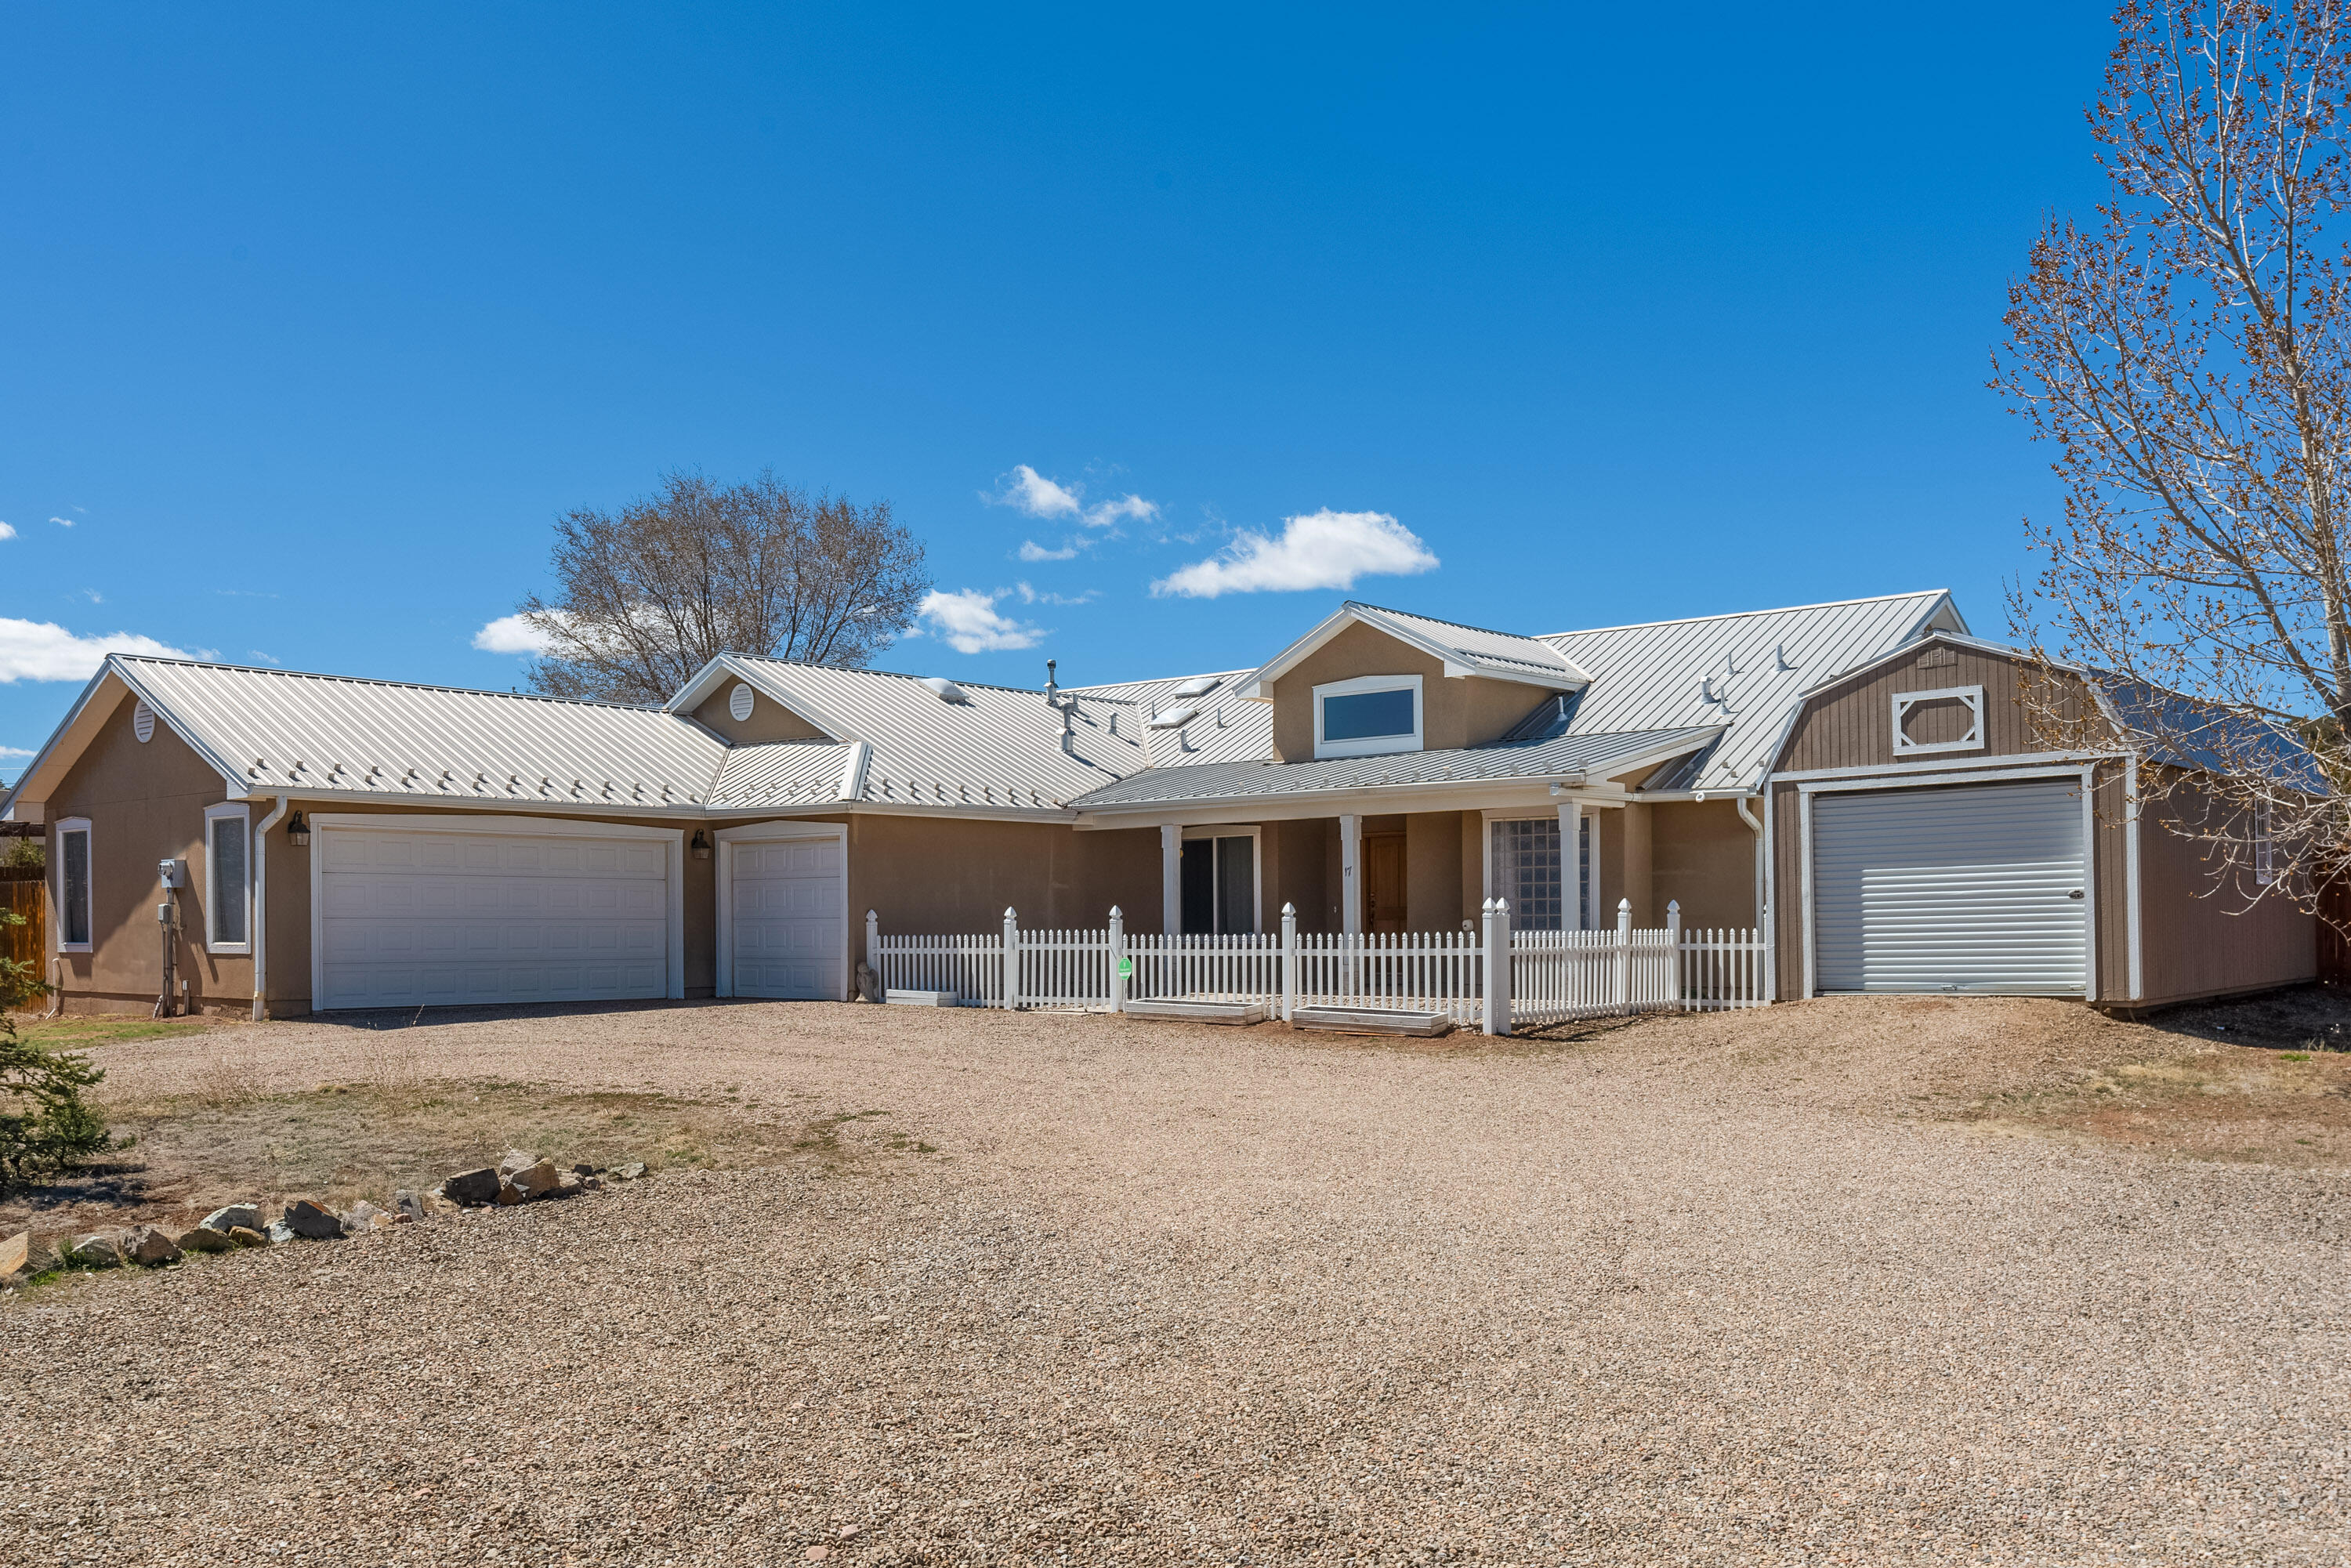 What a great escape from Albuquerque! A northern New Mexico style on treed 1 acre lot includes insulated 3 car garage w/separate 15X15 workshop, RV pad w/50-amp service & 12X32 shed w/roll up door. Wood beams, corbels, vigas, & nichos accent the open floorplan. In the heart of the home, a sophisticated kitchen w/ island, granite counters, bar seating & opens to gracious breakfast nook & entertaining areas. Spacious, light filled living area w/vaulted ceiling, pellet stove & formal dining. Primary suite has door to the back patio, large walk-in closet, & luxurious bath w/soaking tub, separate shower & 2 vanities. Covered patio & fenced courtyard in front with no maintenance rock. Lg fenced backyard w/native grass, plumbed for sprinkler. You'll want to make this your home!